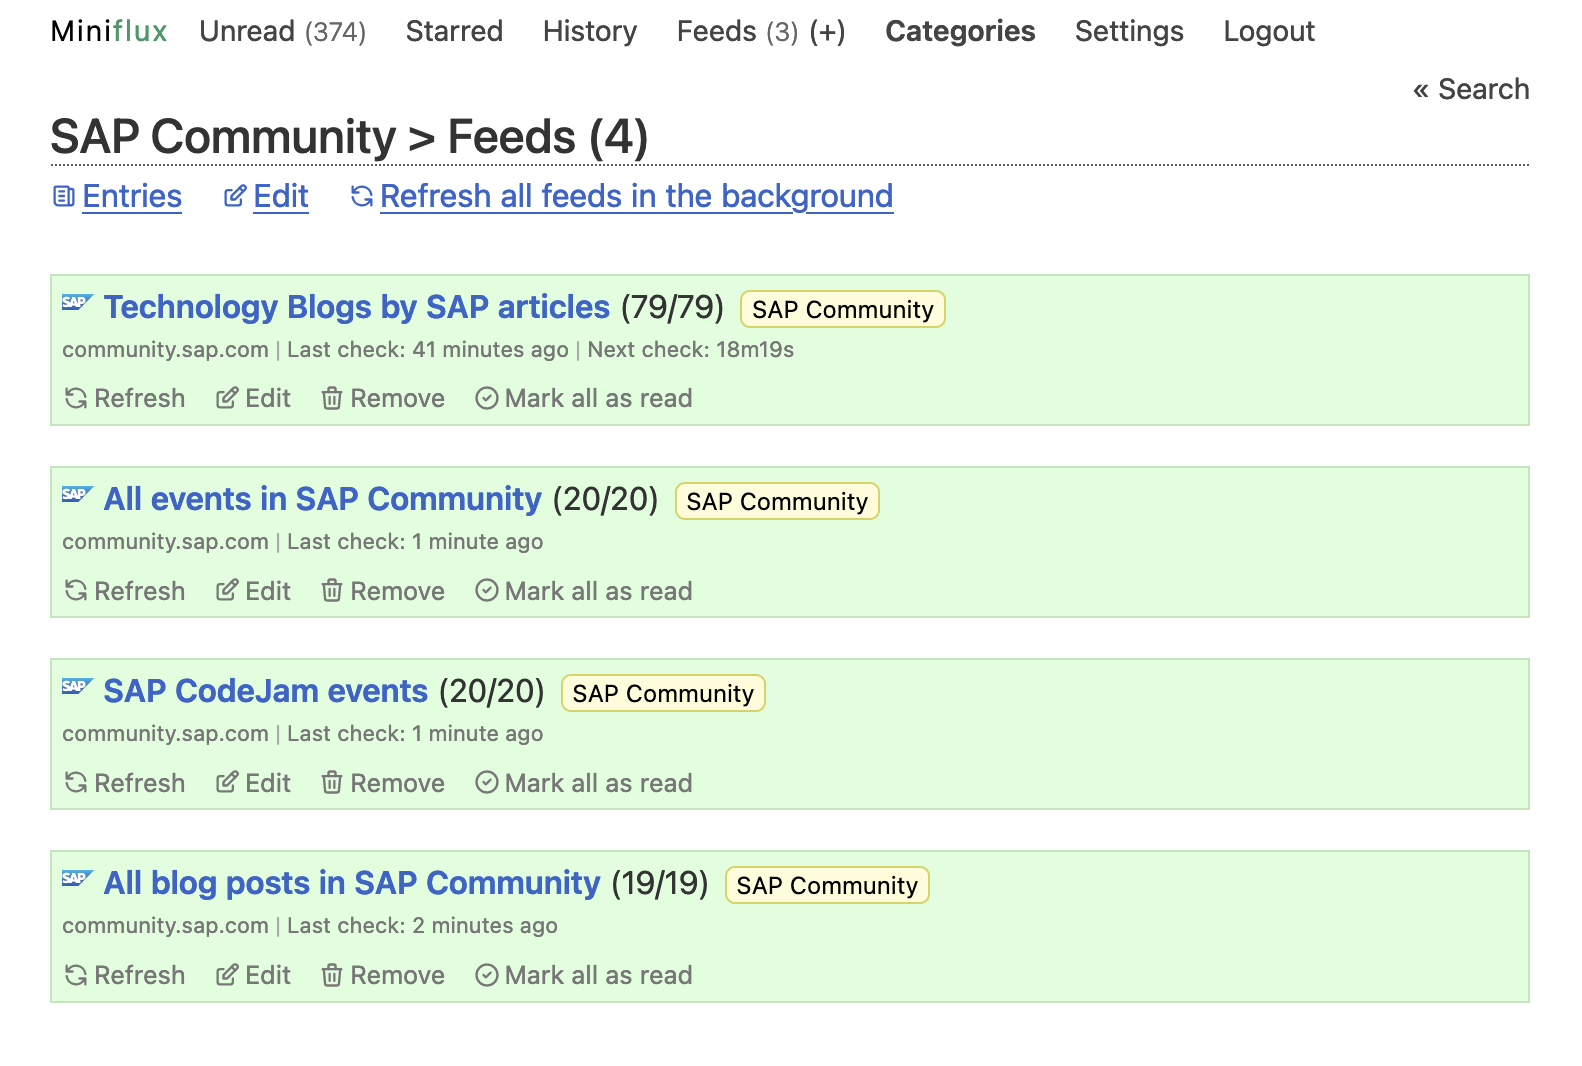 SAP Community RSS feeds in my RSS reader